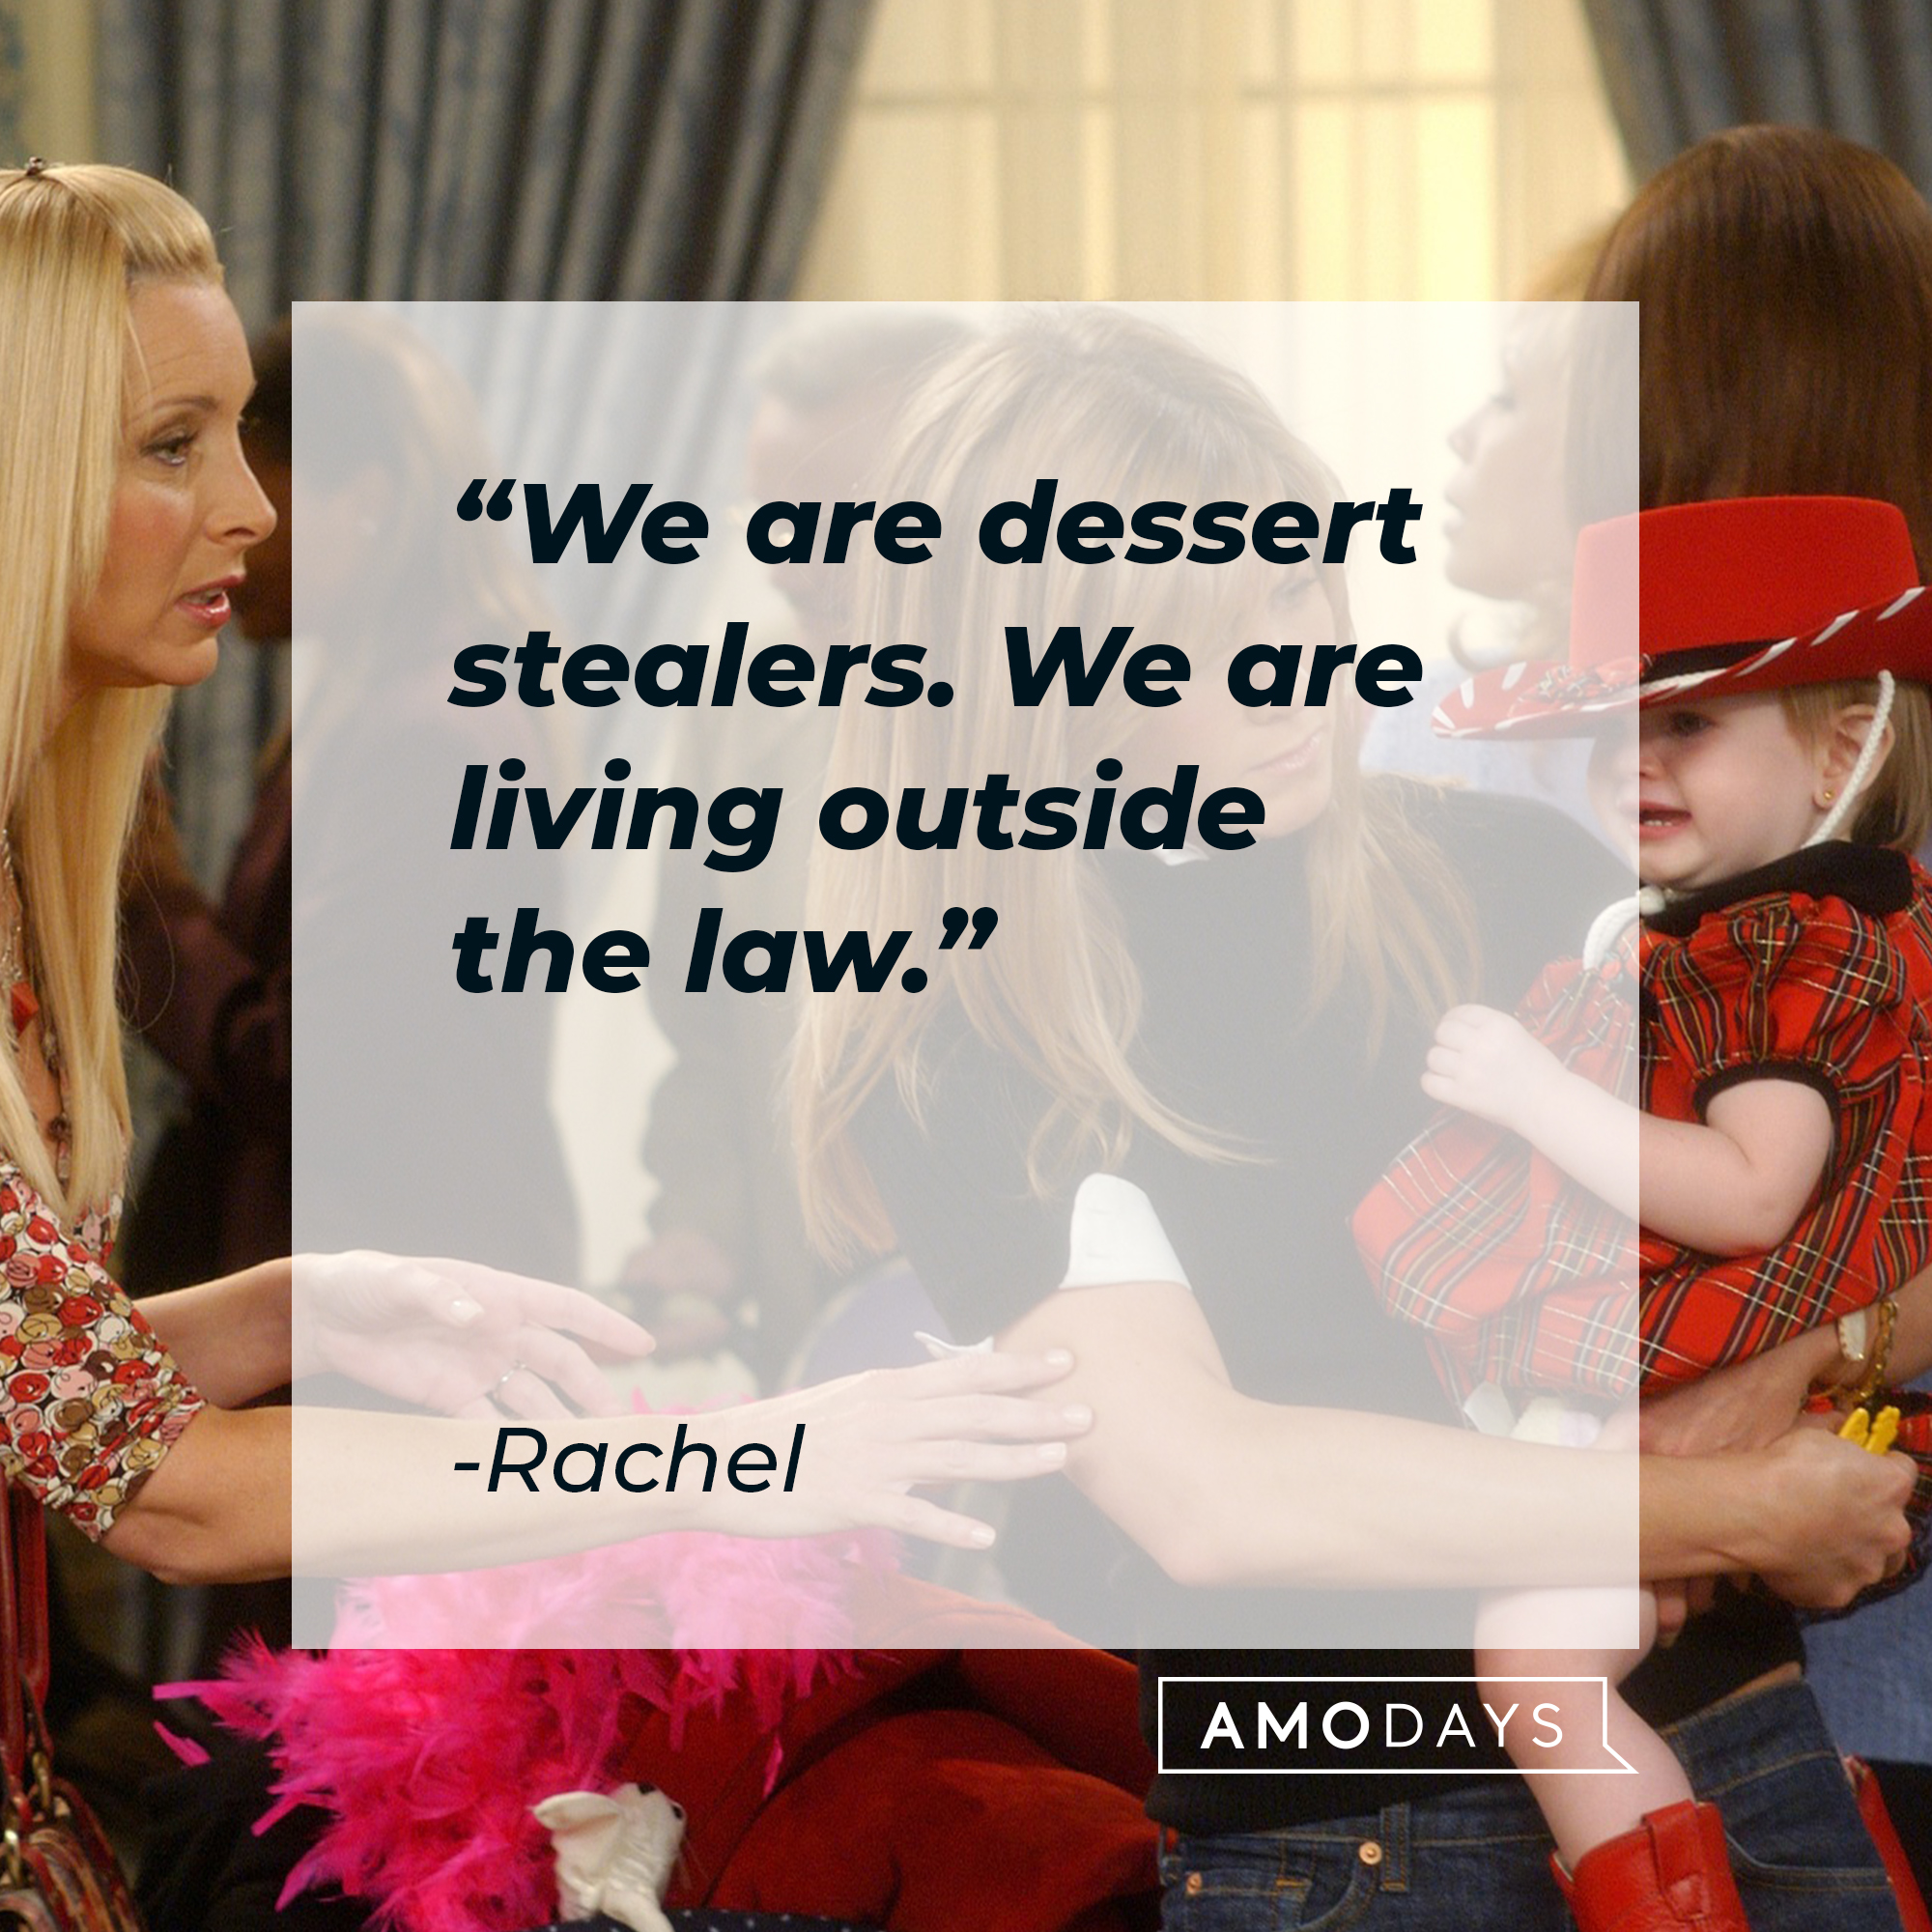 Rachel's quote: “We are dessert stealers. We are living outside the law.” | Source: facebook.com/friends.tv